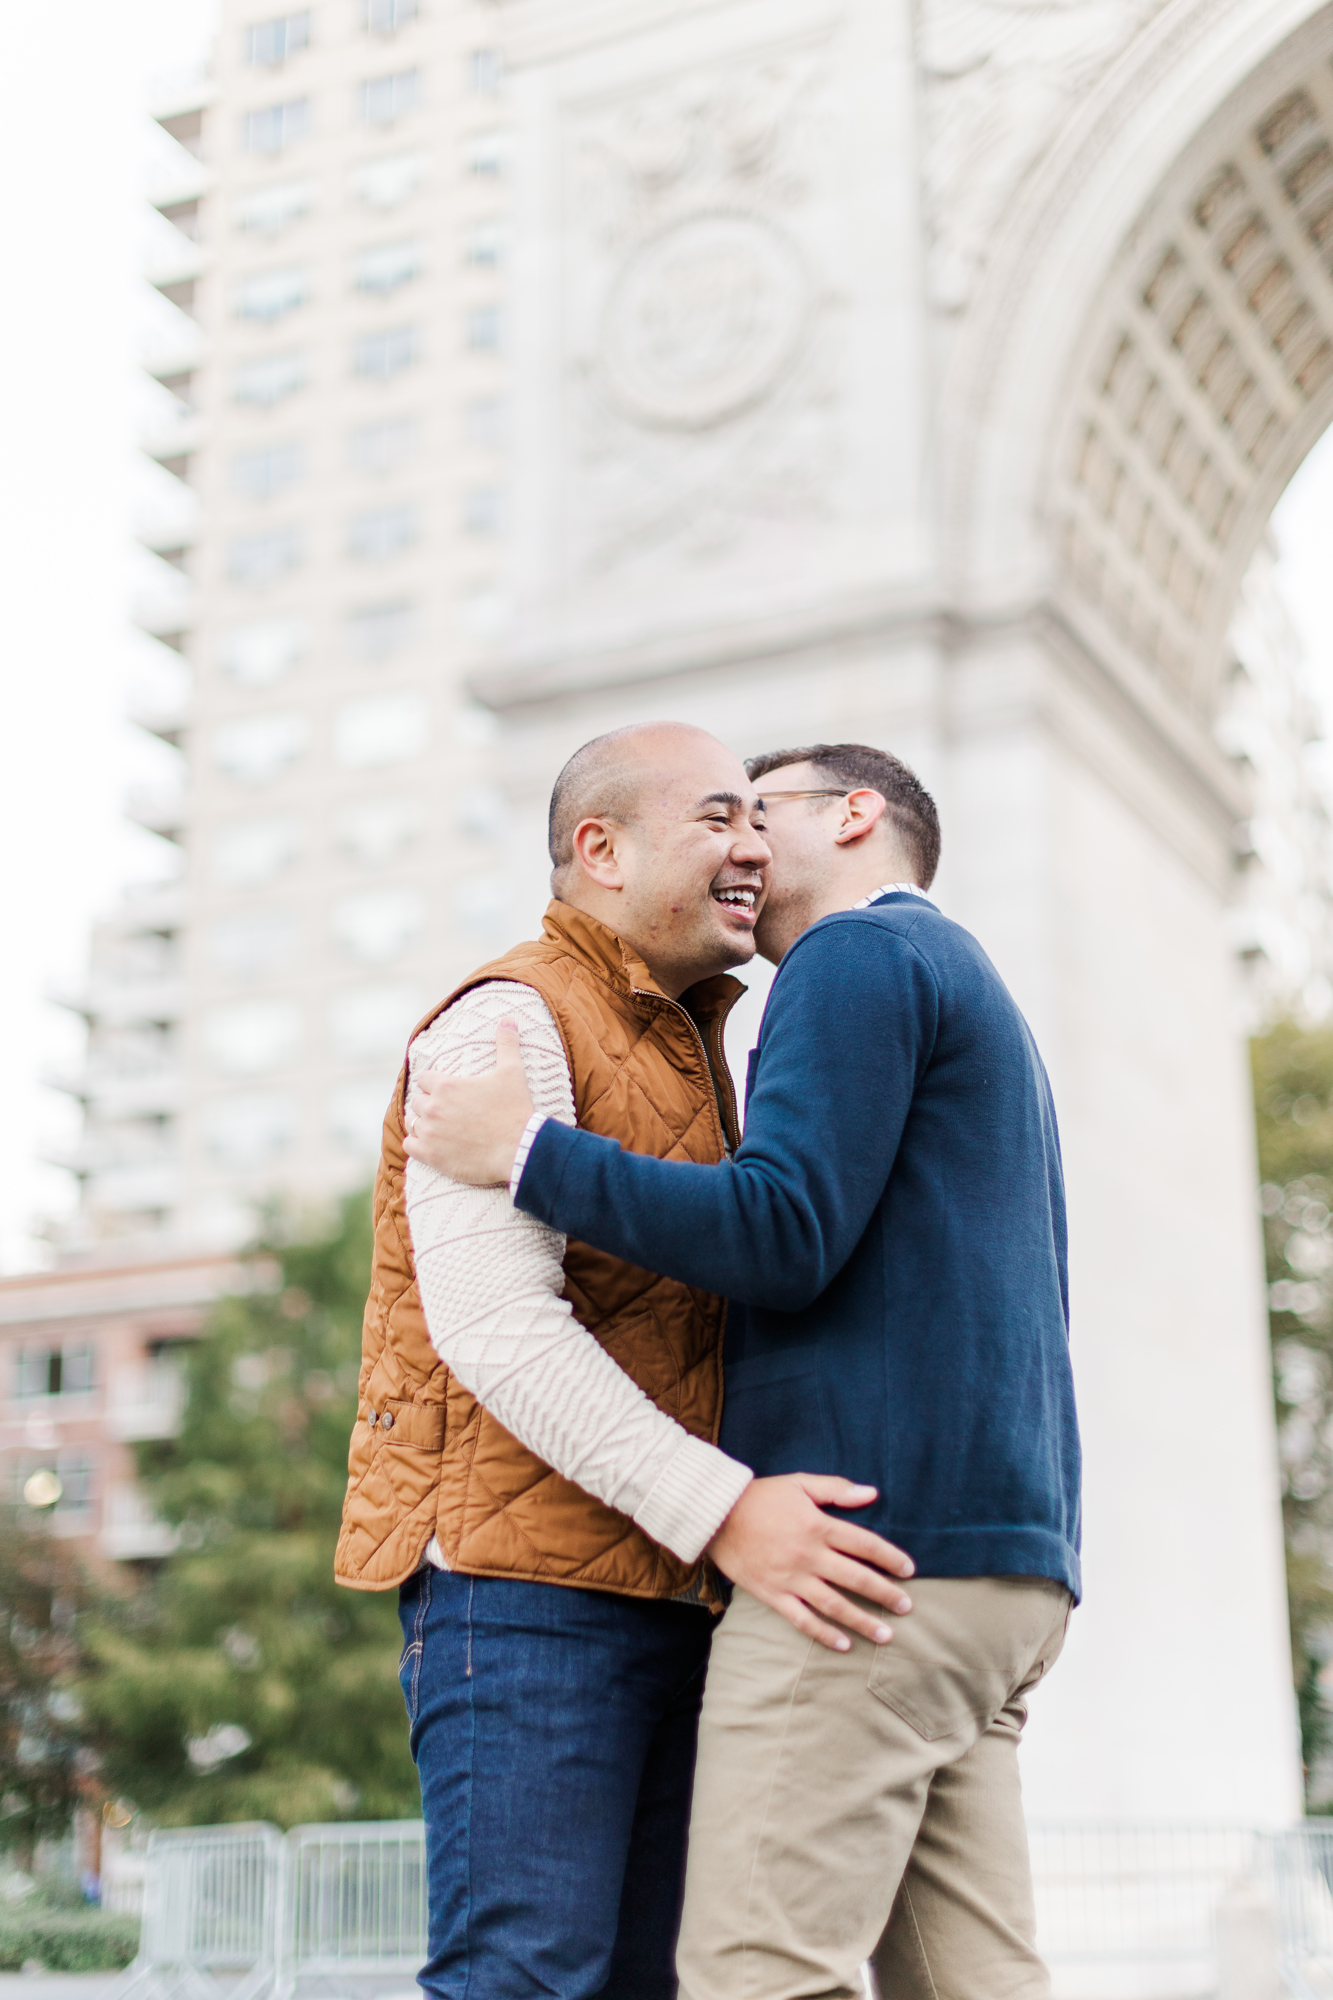 Touching West Village Engagement Photography with Stonewall